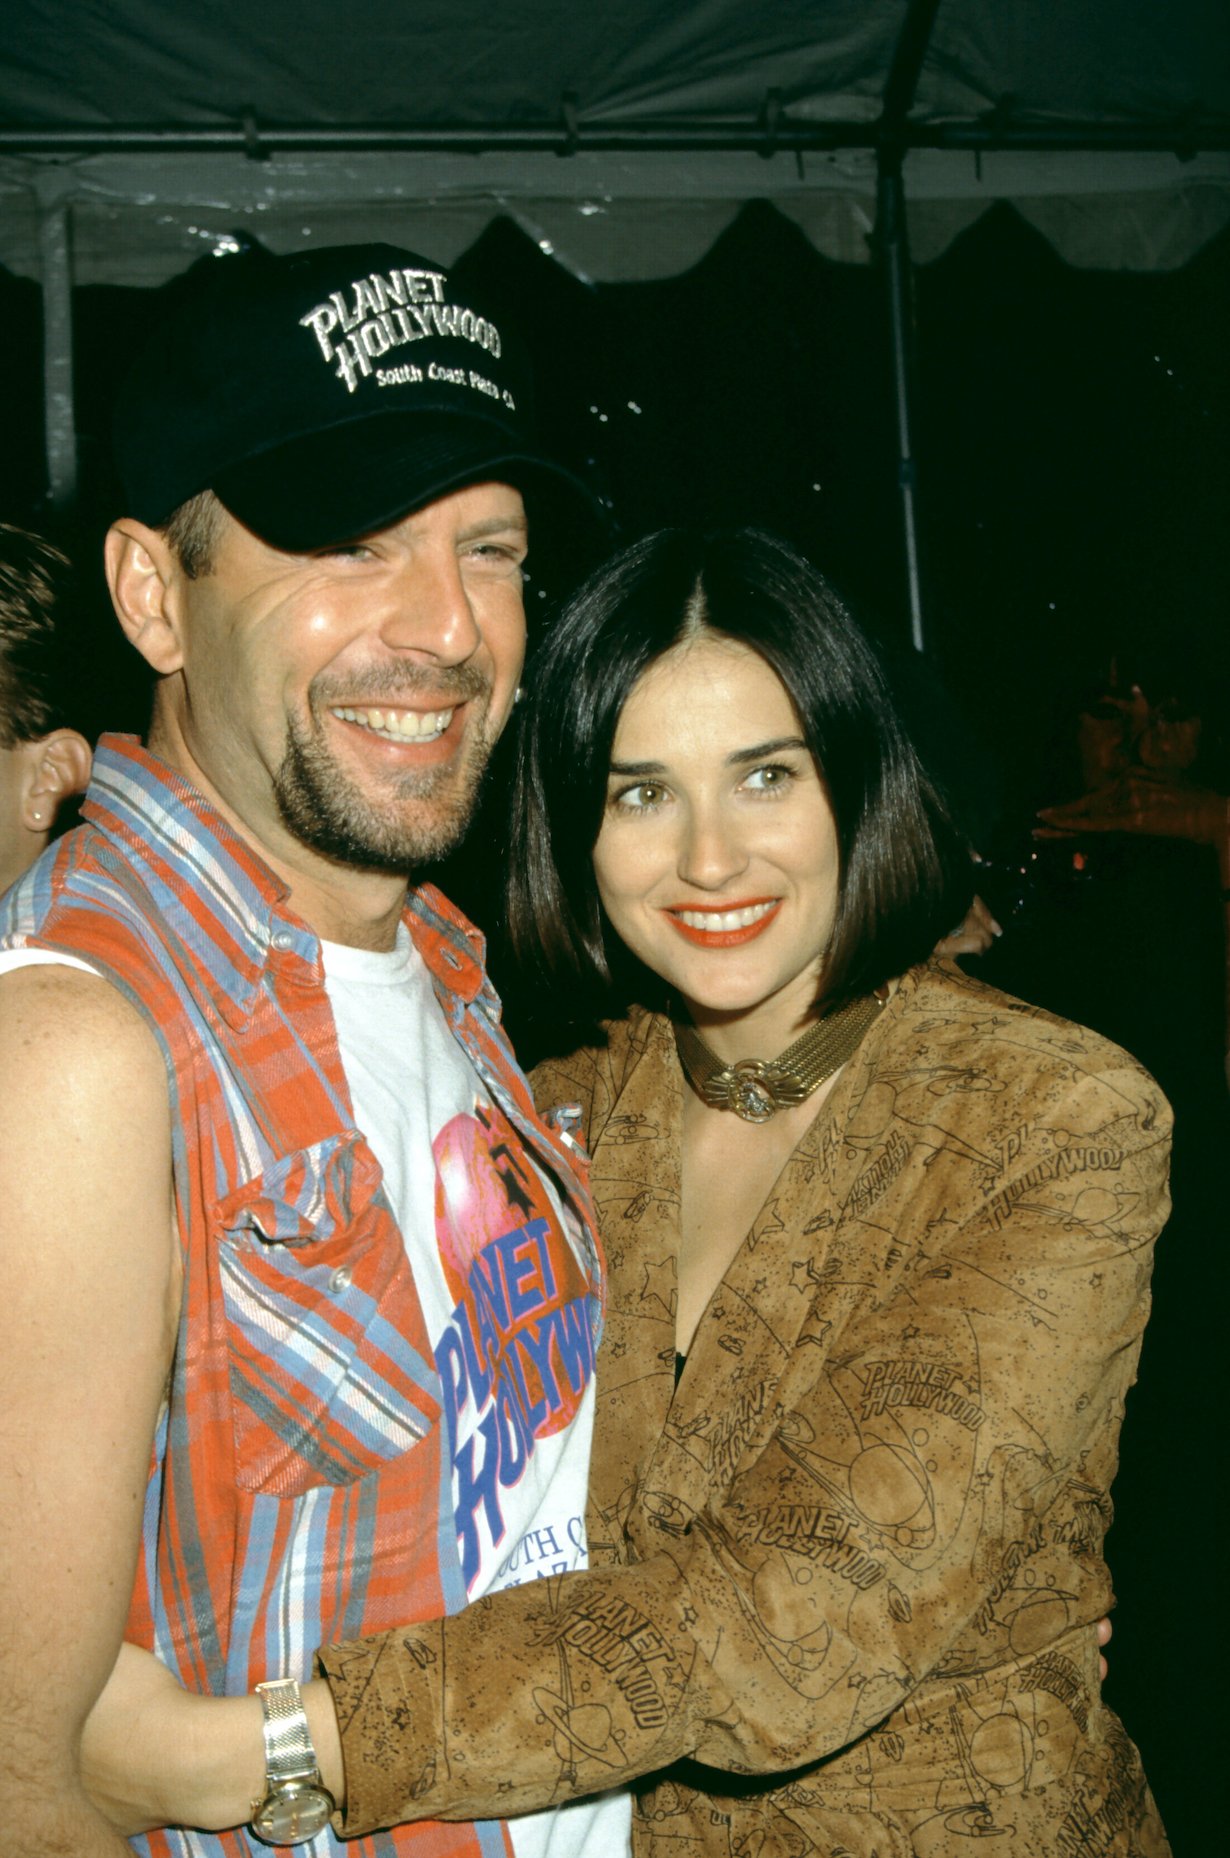 Demi Moore and actor Bruce Willis in 1992 at Planet Hollywood, South Coast Plaza in Costa Mesa, California